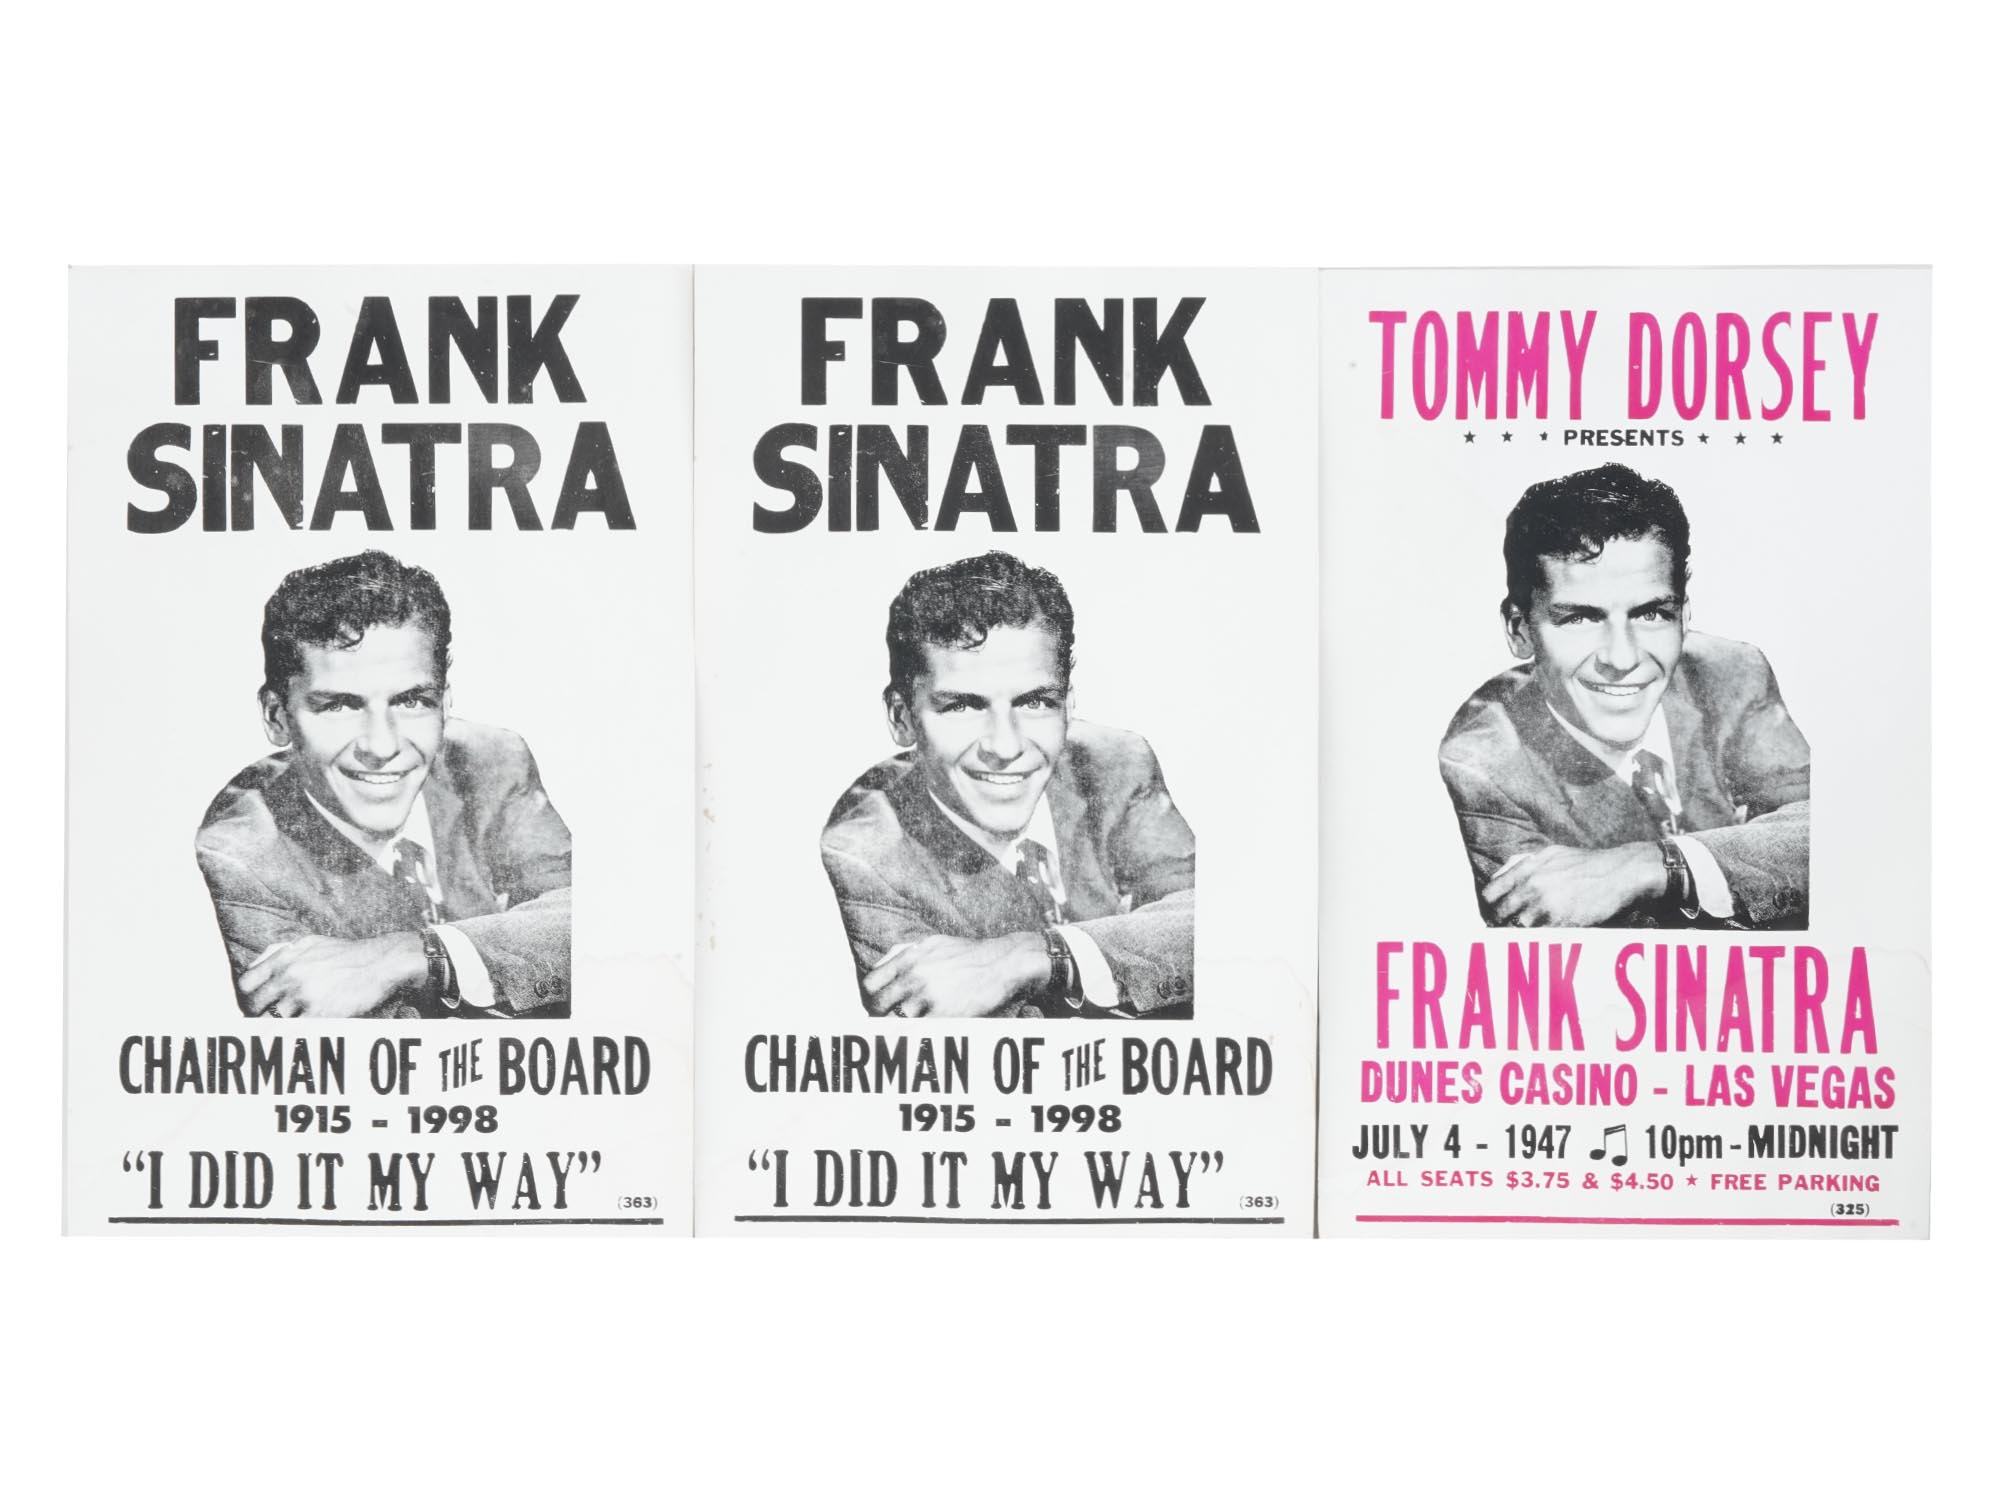 TRIBUNE SHOWPRINT WALL POSTERS WITH FRANK SINATRA PIC-1